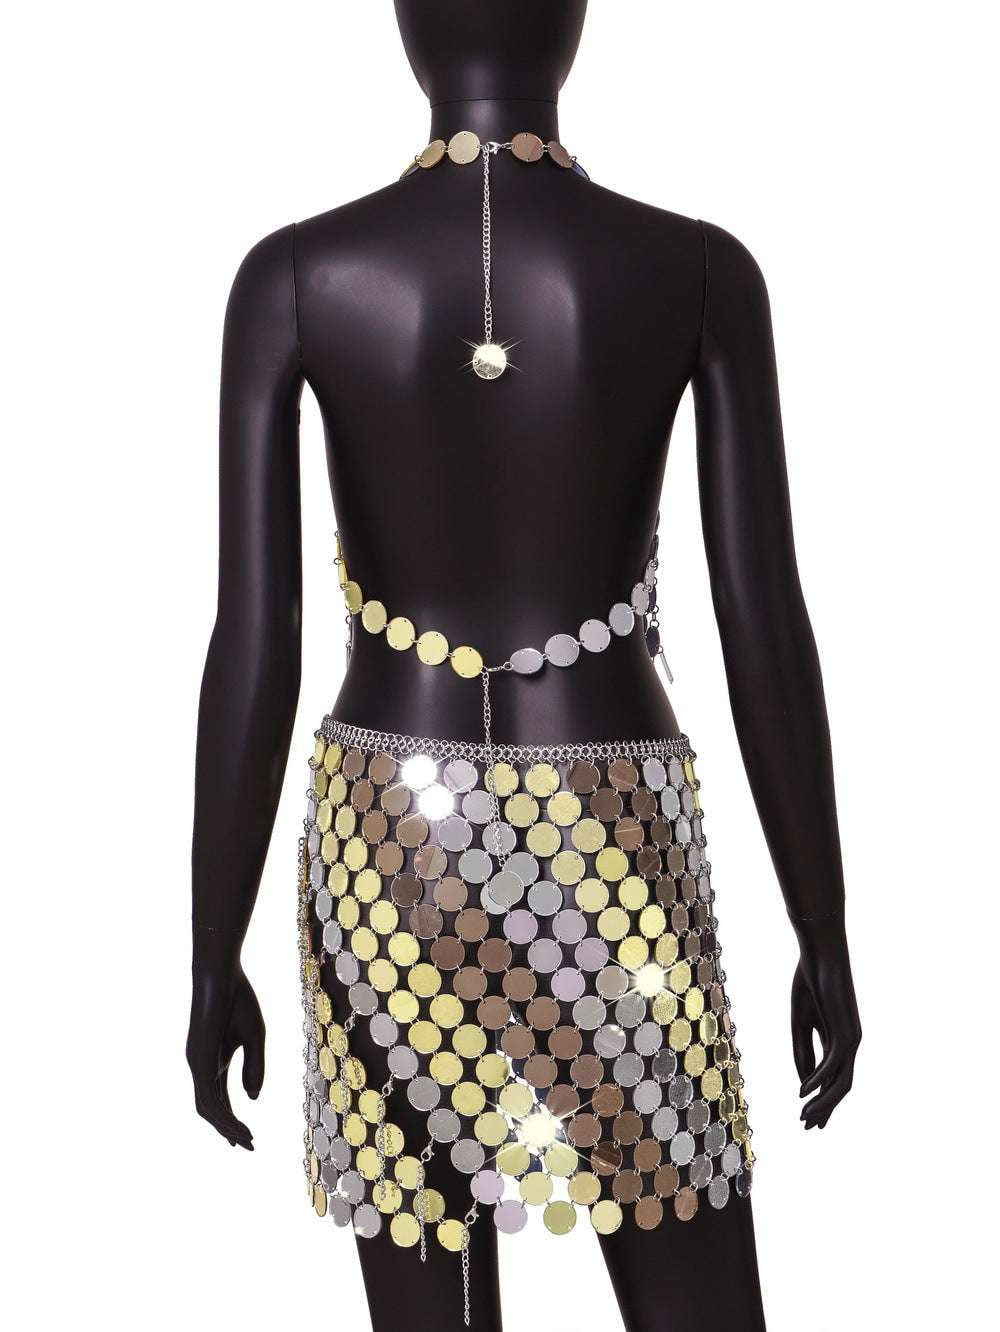 Acrylic Suit Skirt, Autumn Skirt Set, Trendy Skirt Outfit - available at Sparq Mart